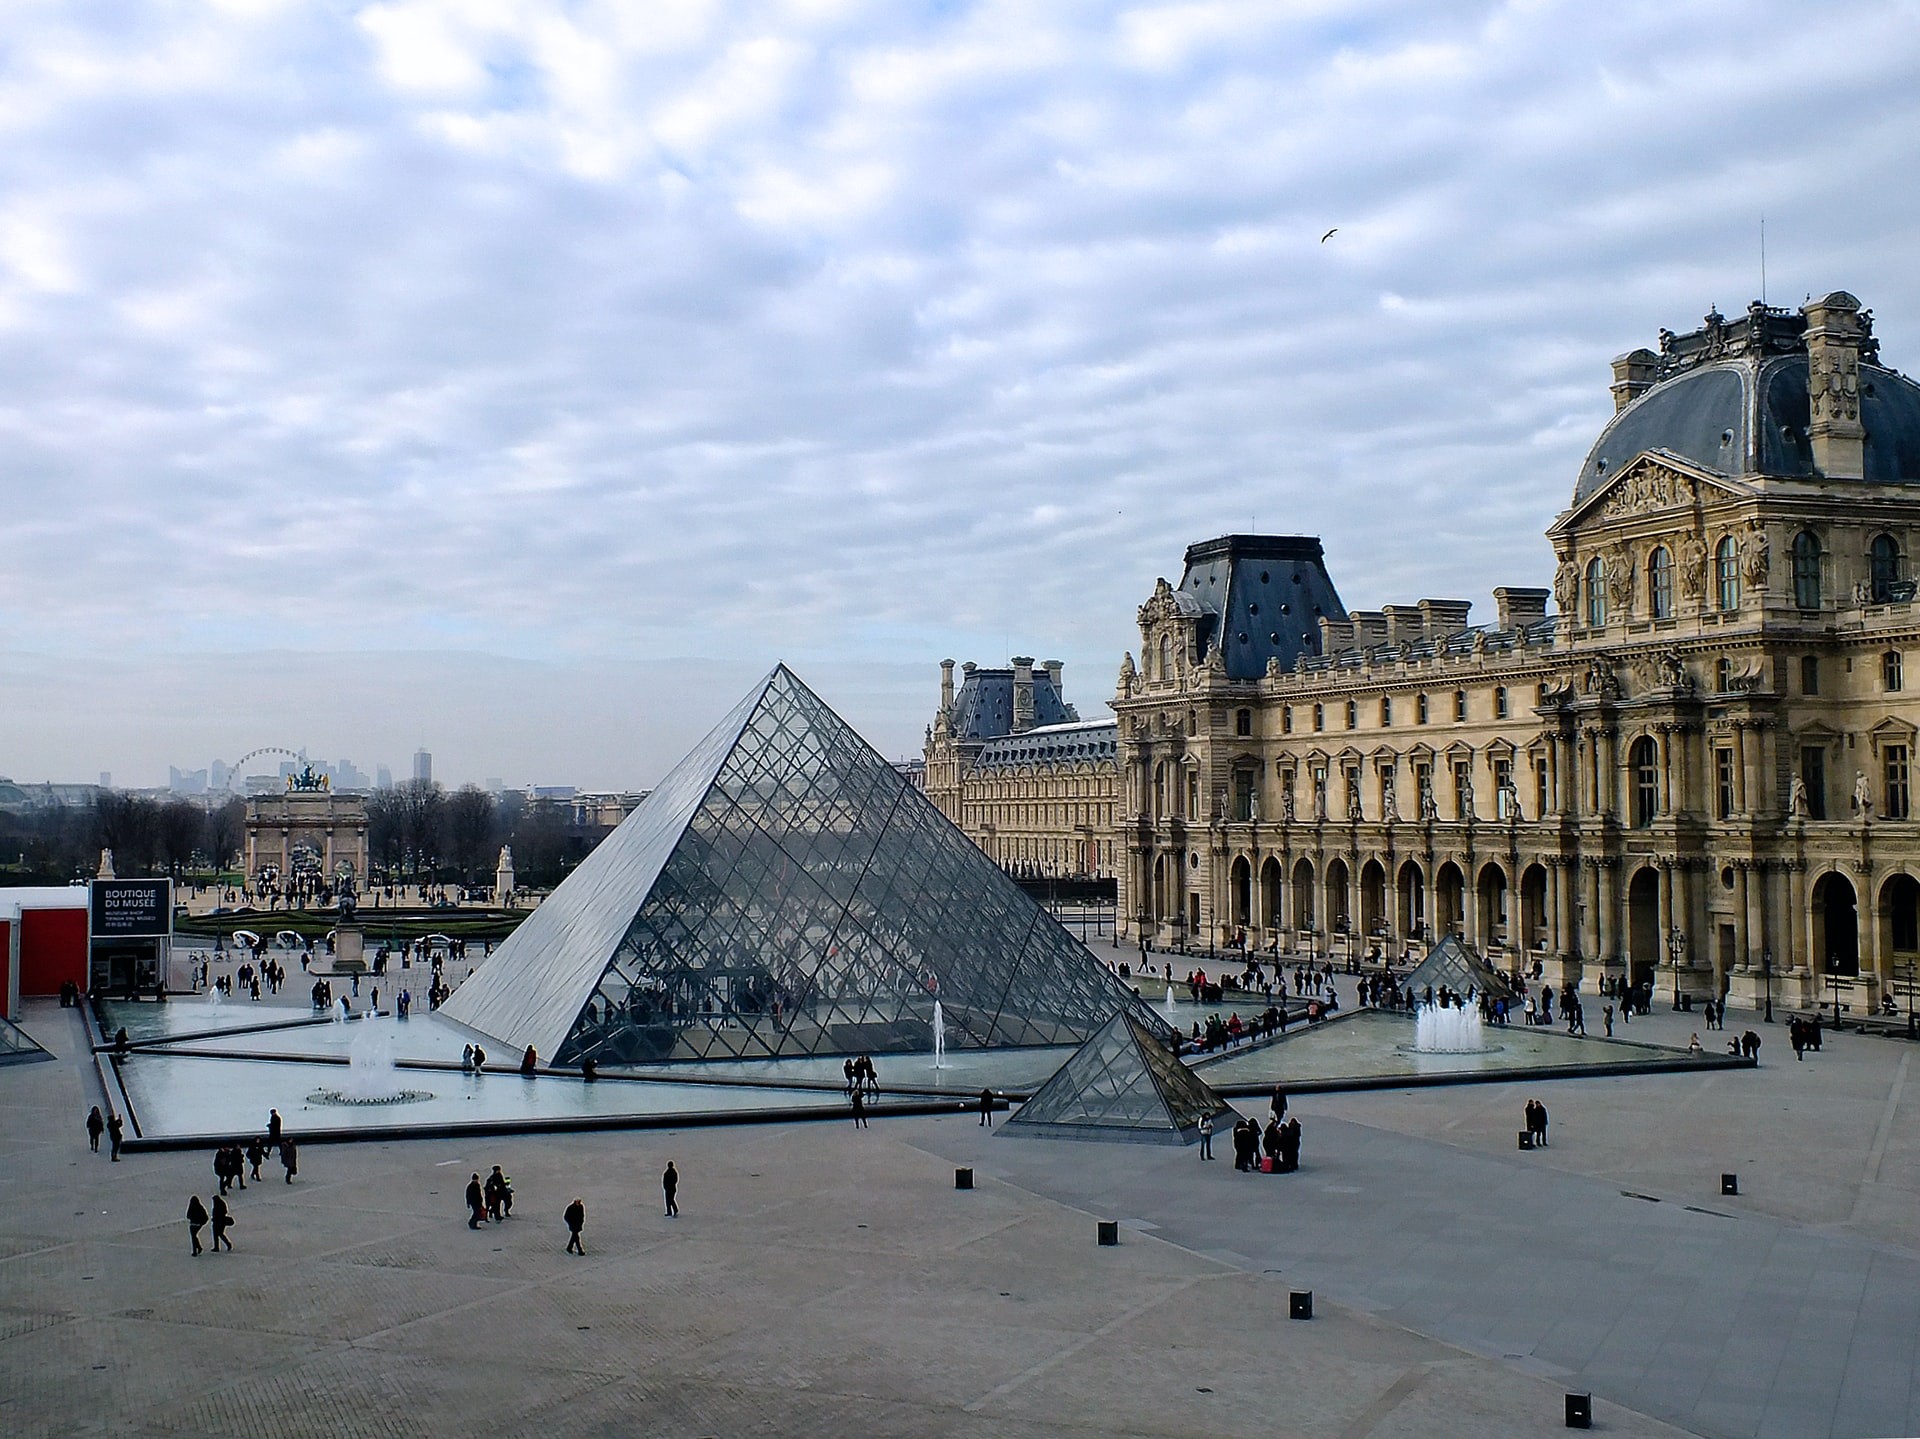 The outside of the Louvre museum in Paris, France.